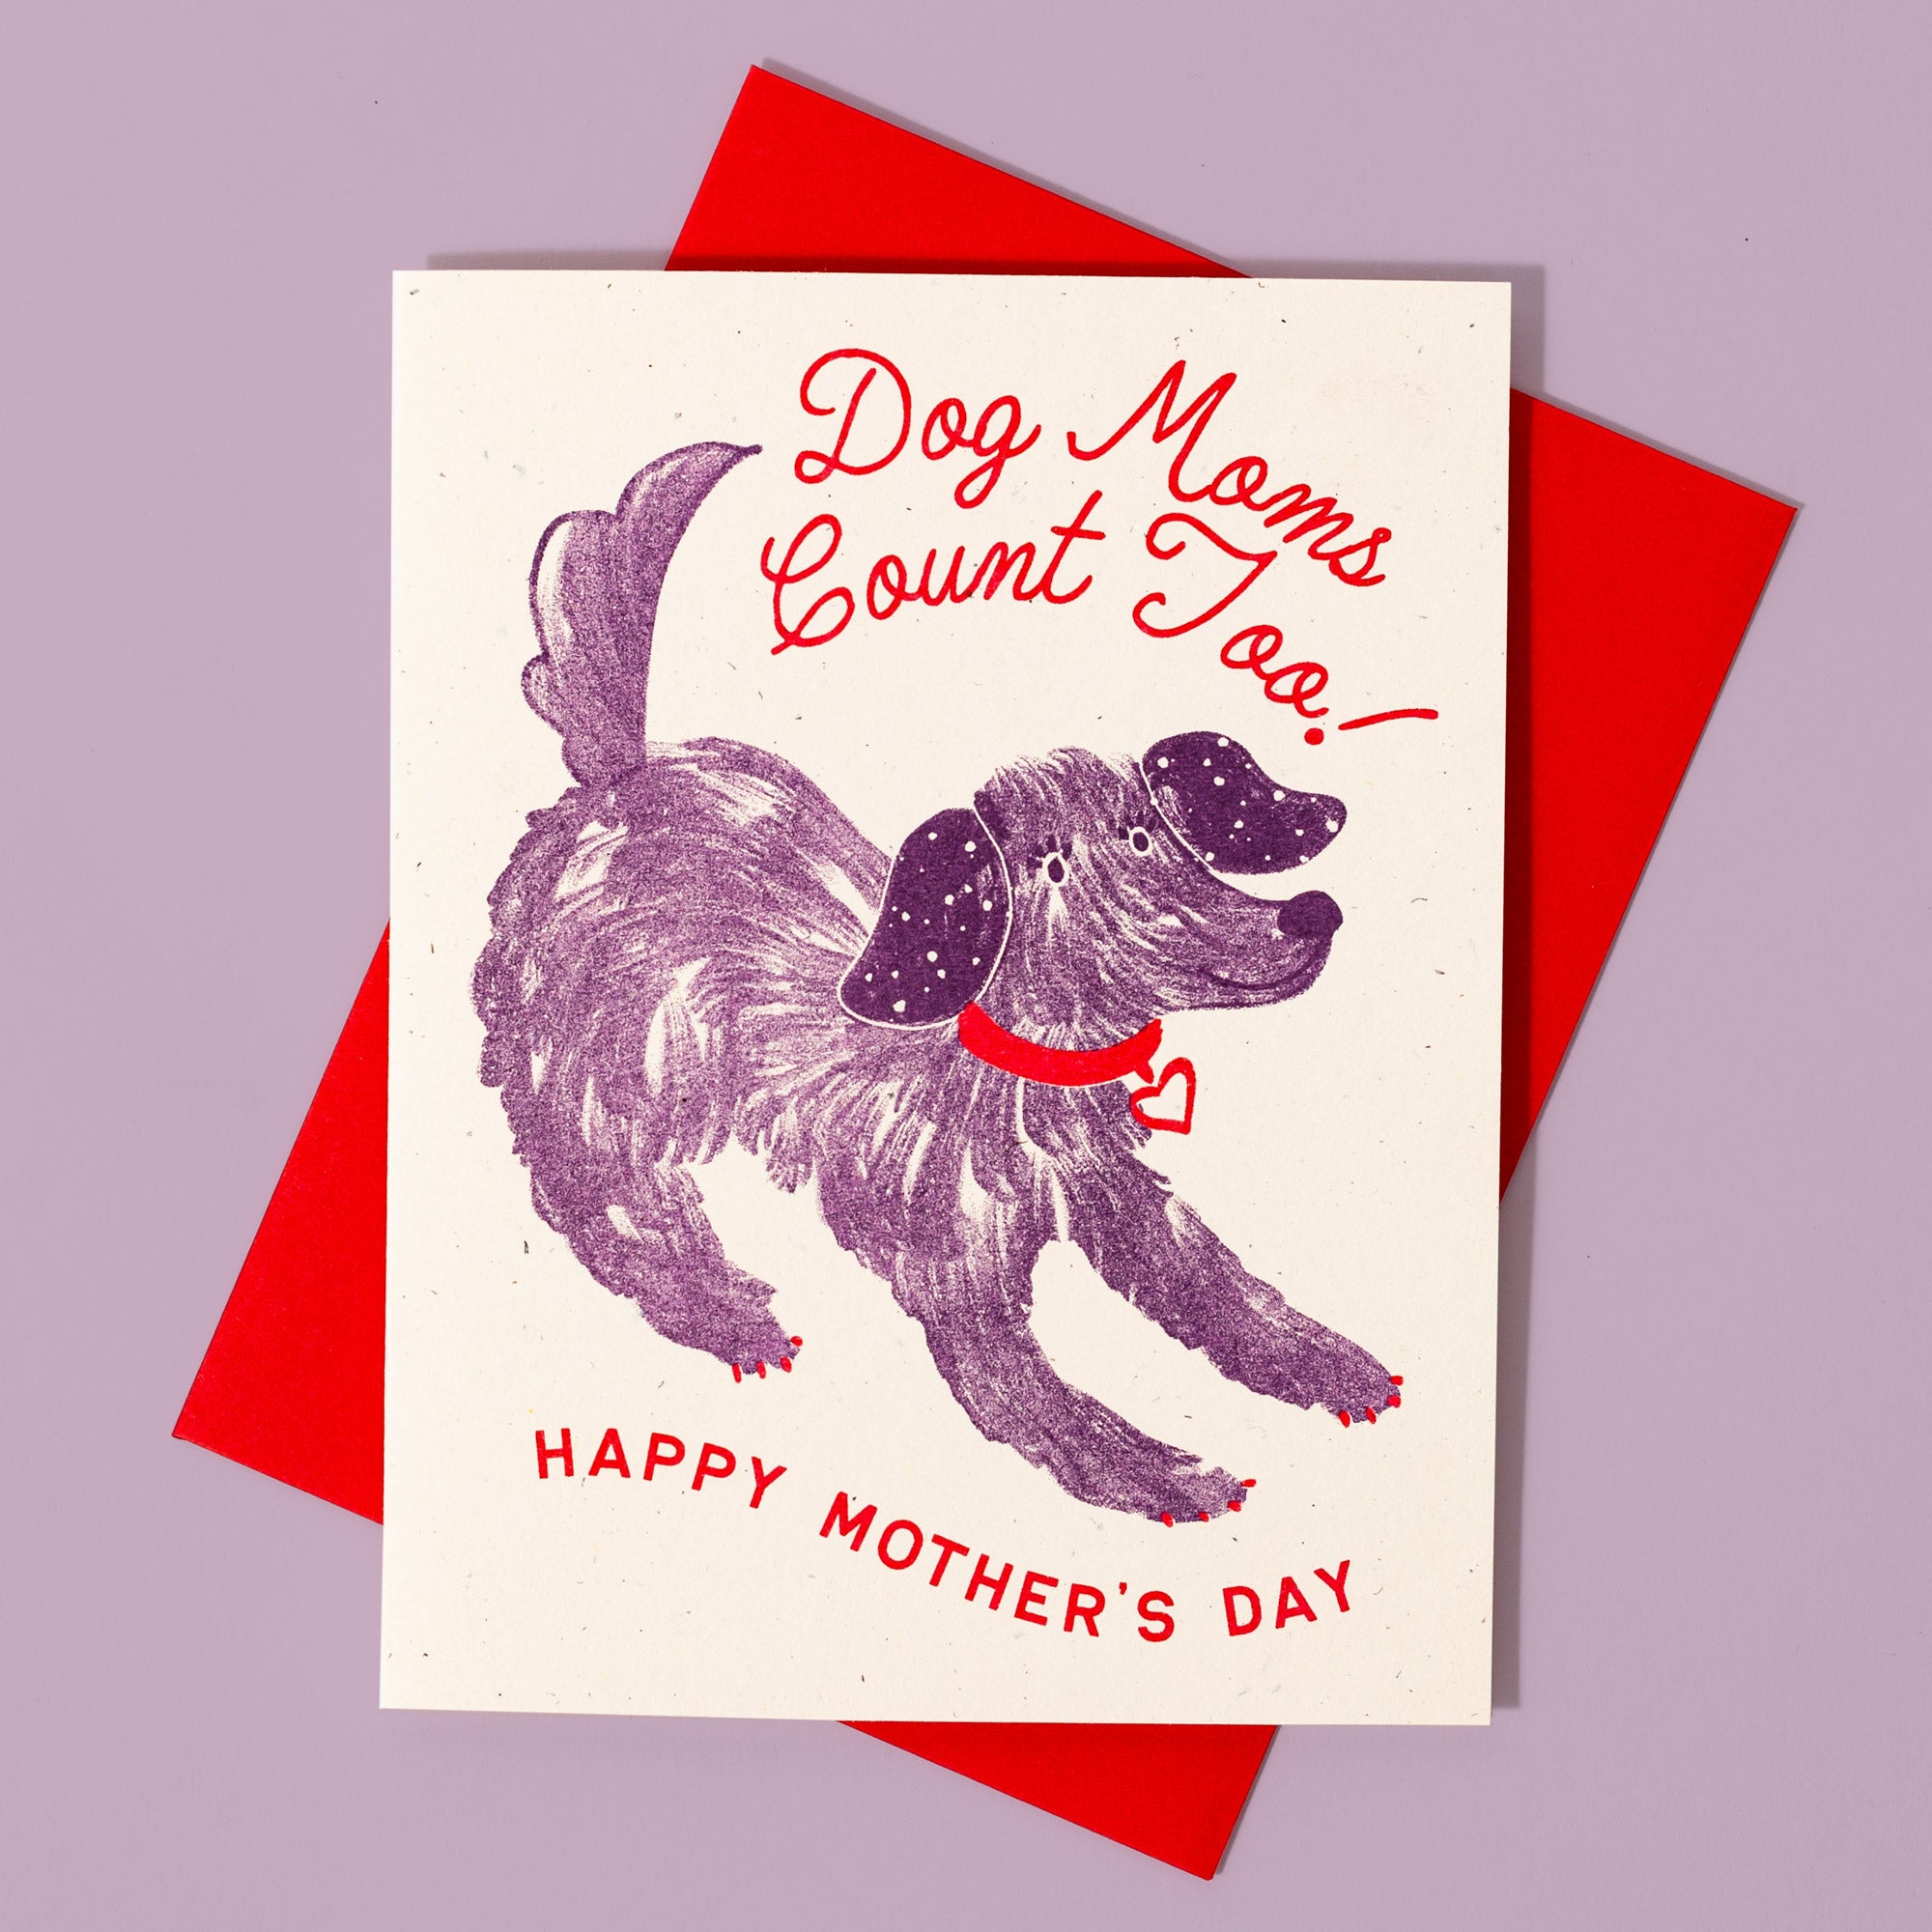 Dog Moms Count Too - Risograph Mother's Day Card